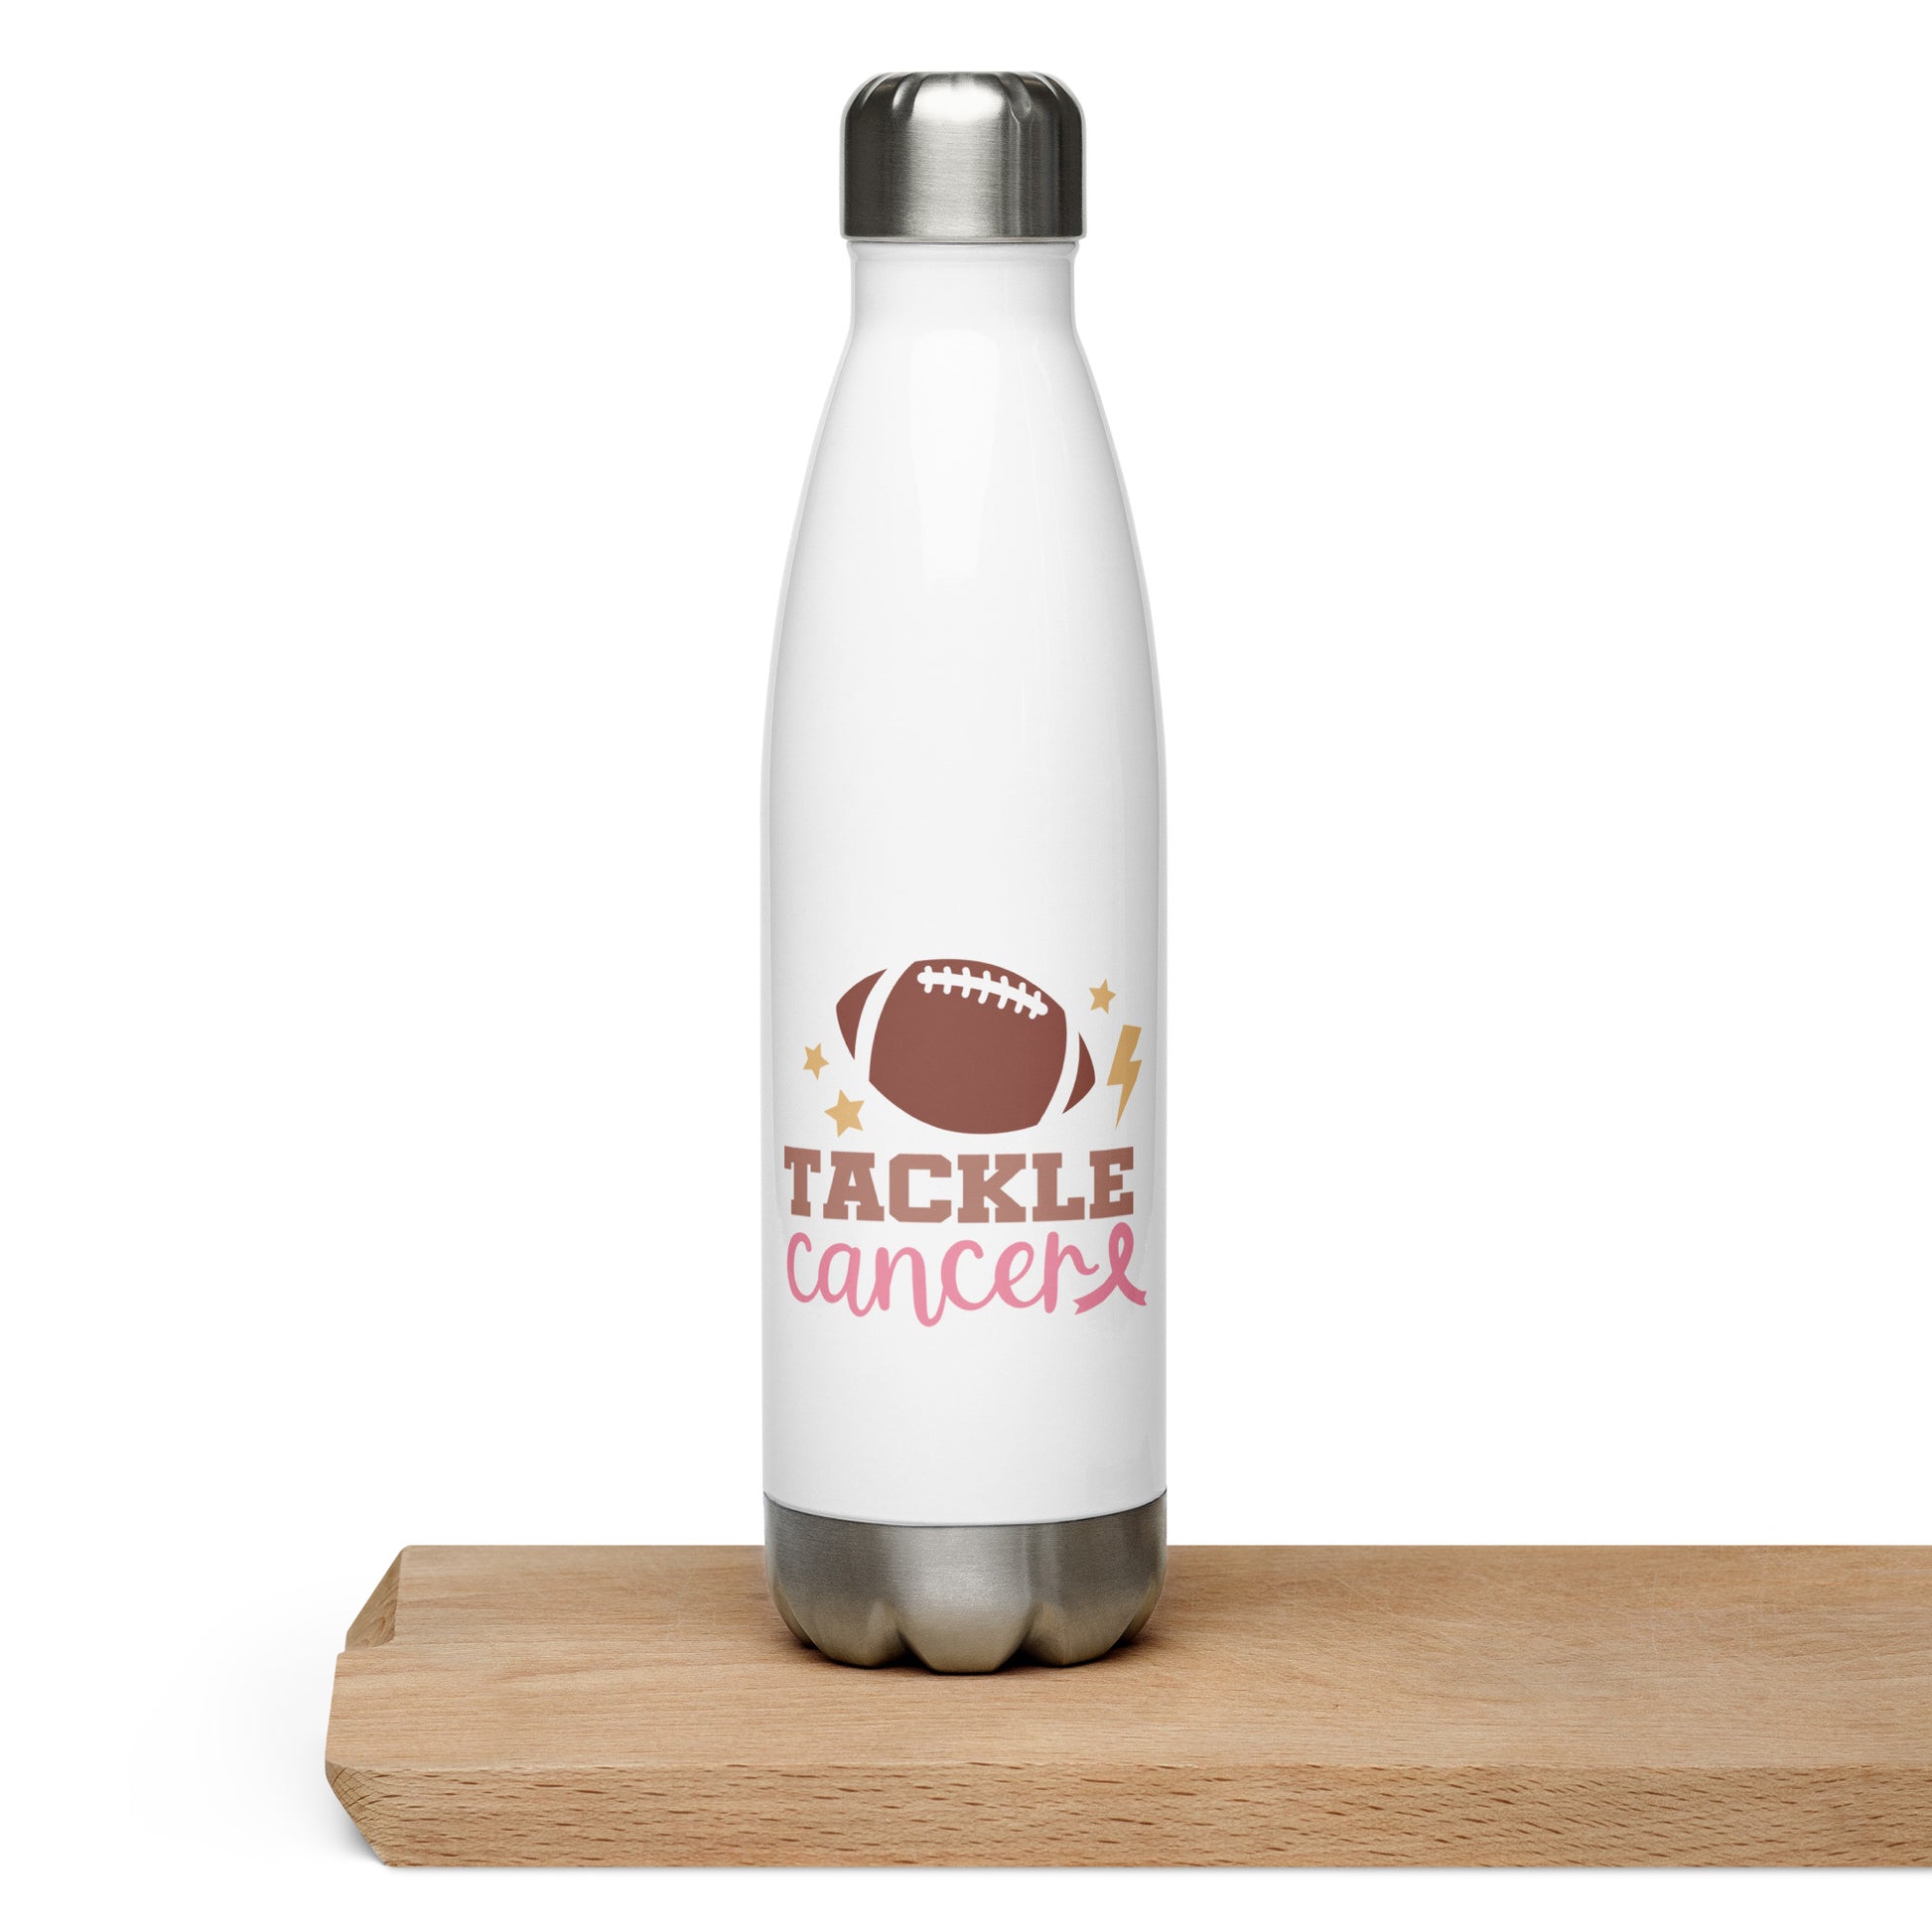 Tackle Cancer Breast Cancer Awareness Stainless Steel Water Bottle 17 oz (500 ml)